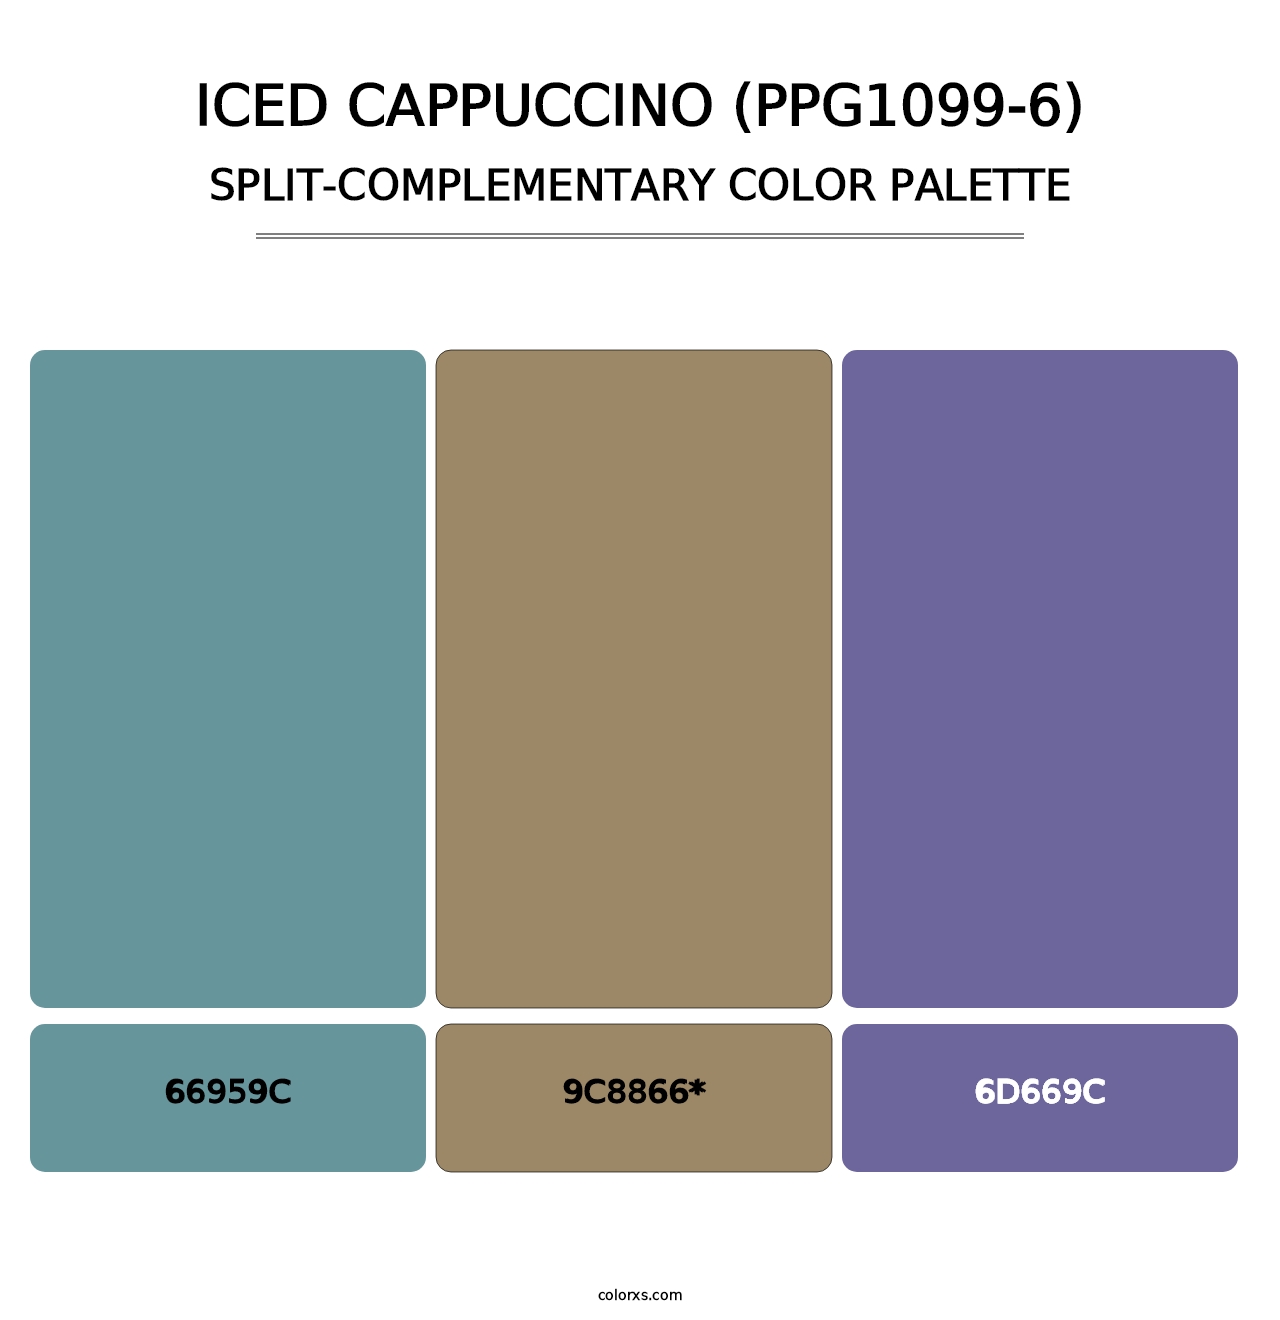 Iced Cappuccino (PPG1099-6) - Split-Complementary Color Palette